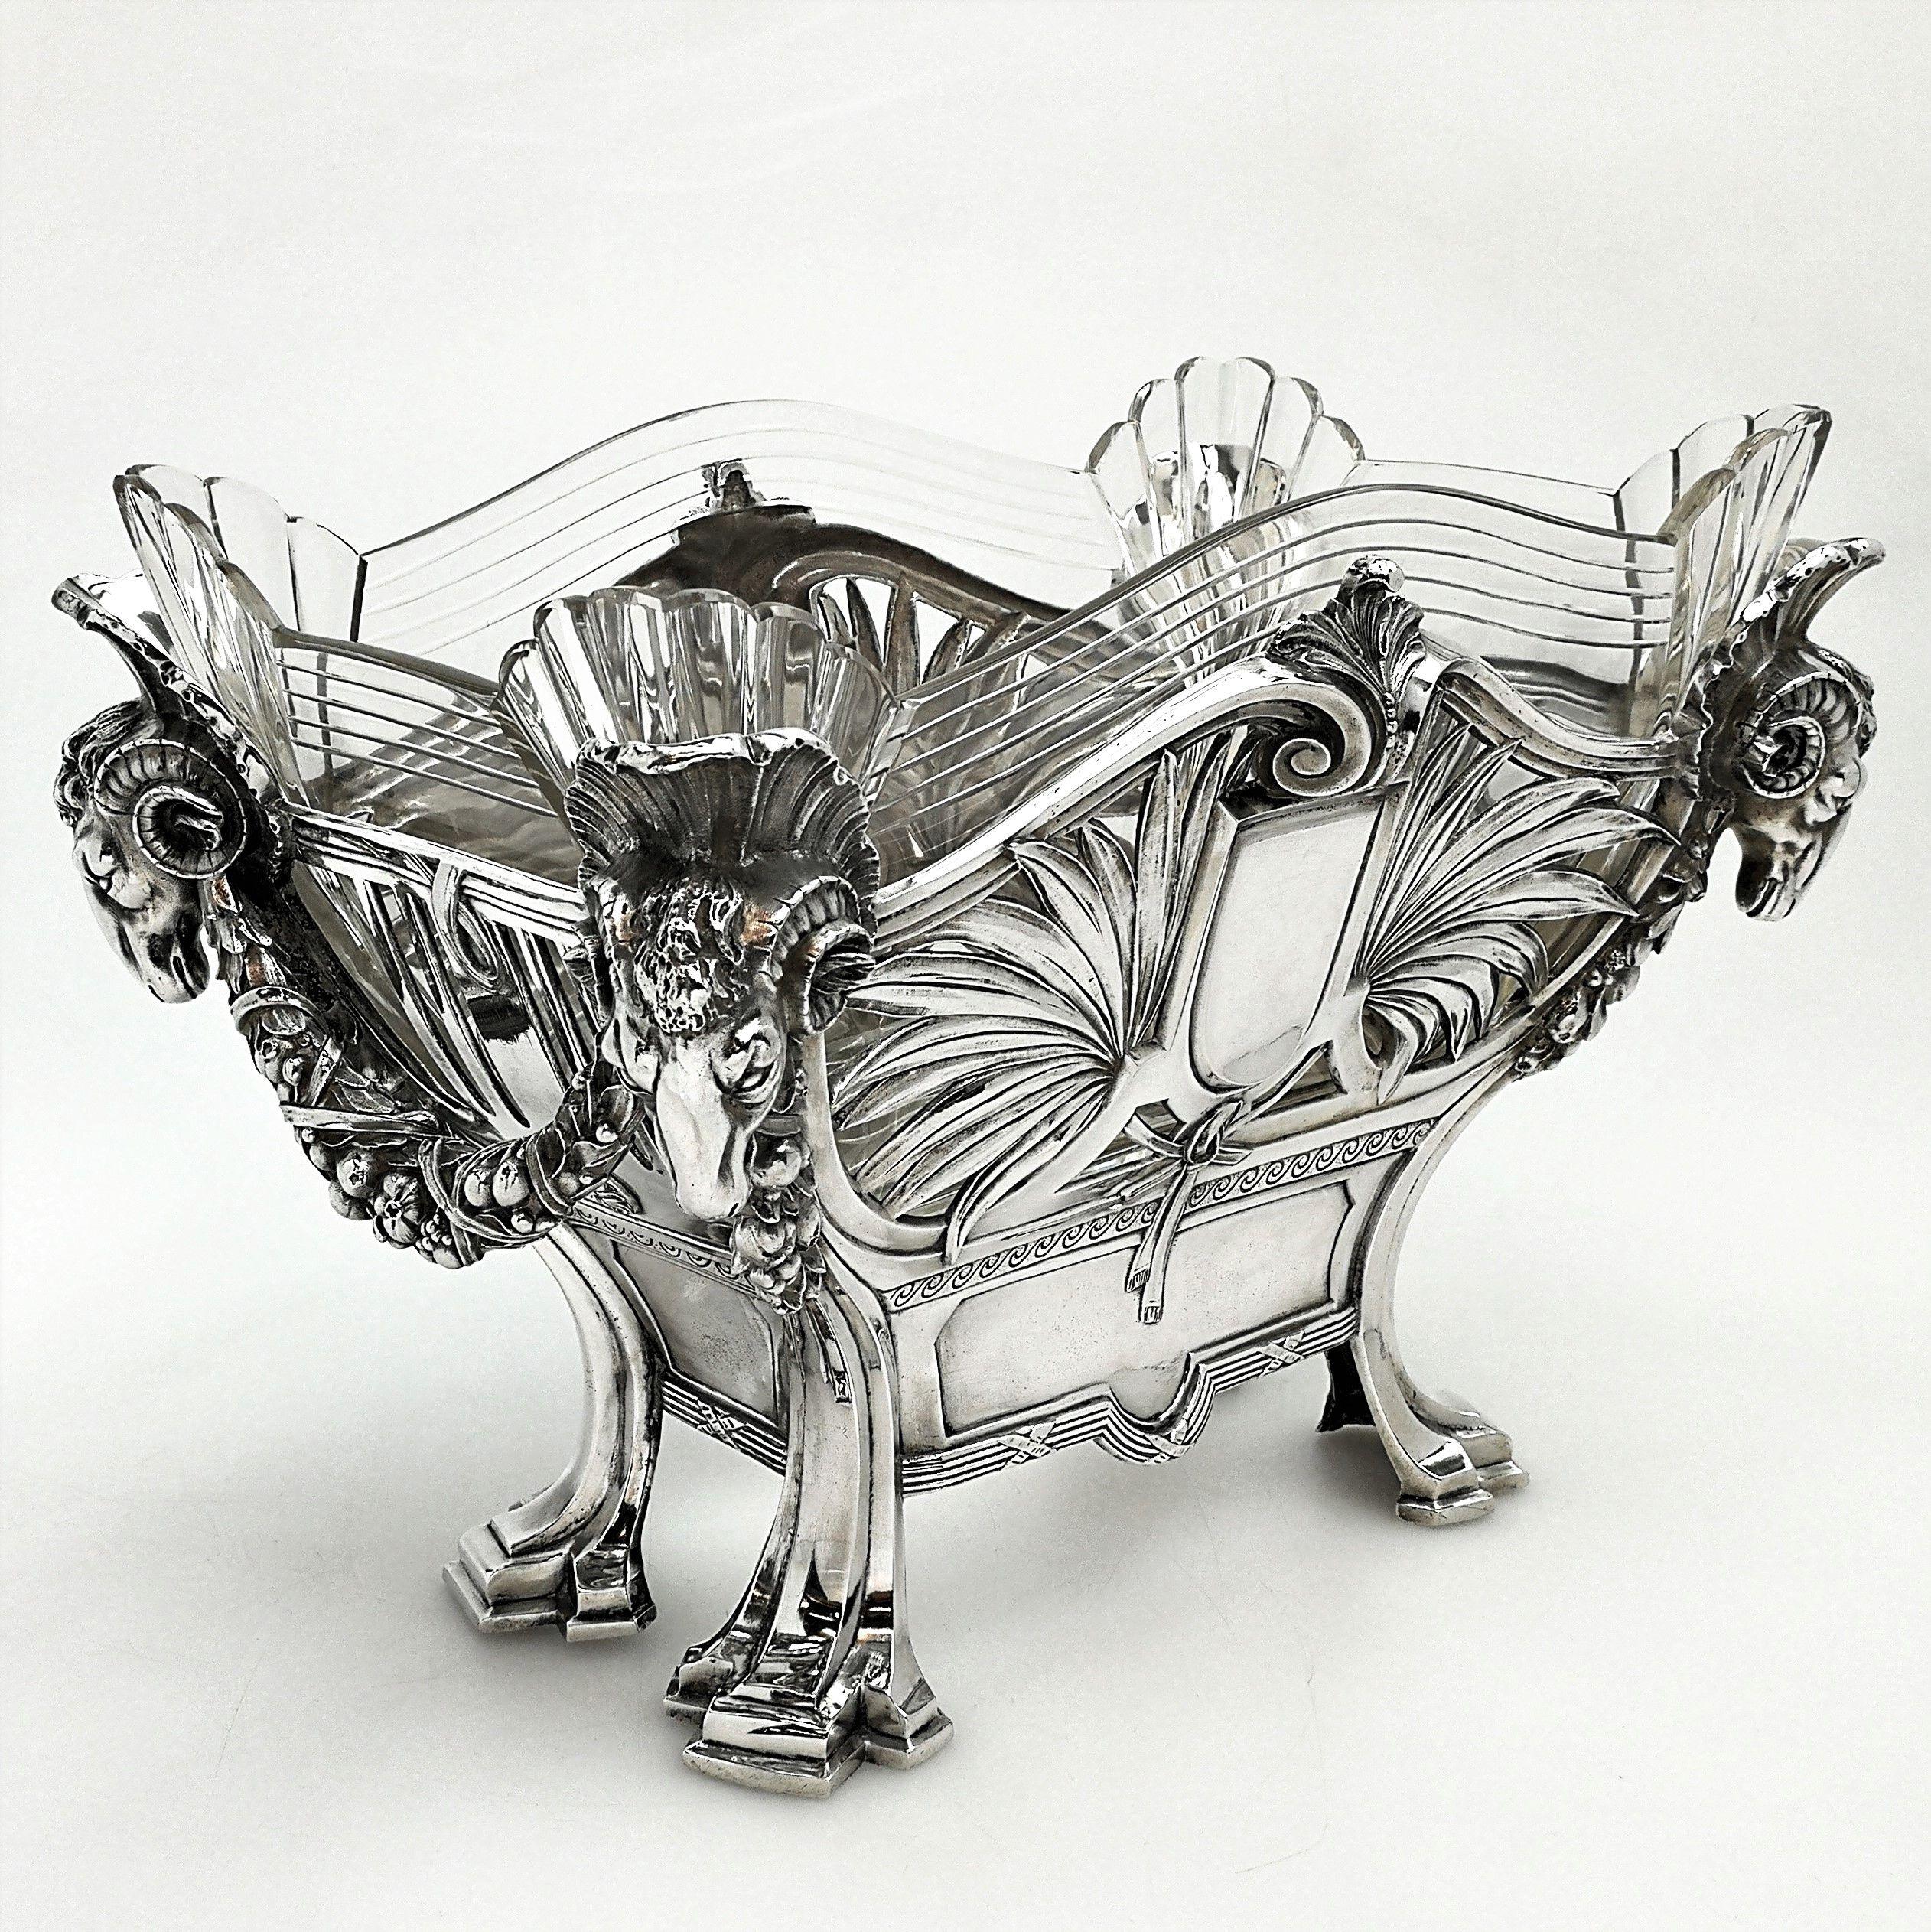 A magnificent antique German solid silver bowl or jardinière with a gorgeous clear glass liner. The four corners of the silver body feature impressive Rams heads connecting cast silver swags across the shorter sides of the dish. The longer sides of